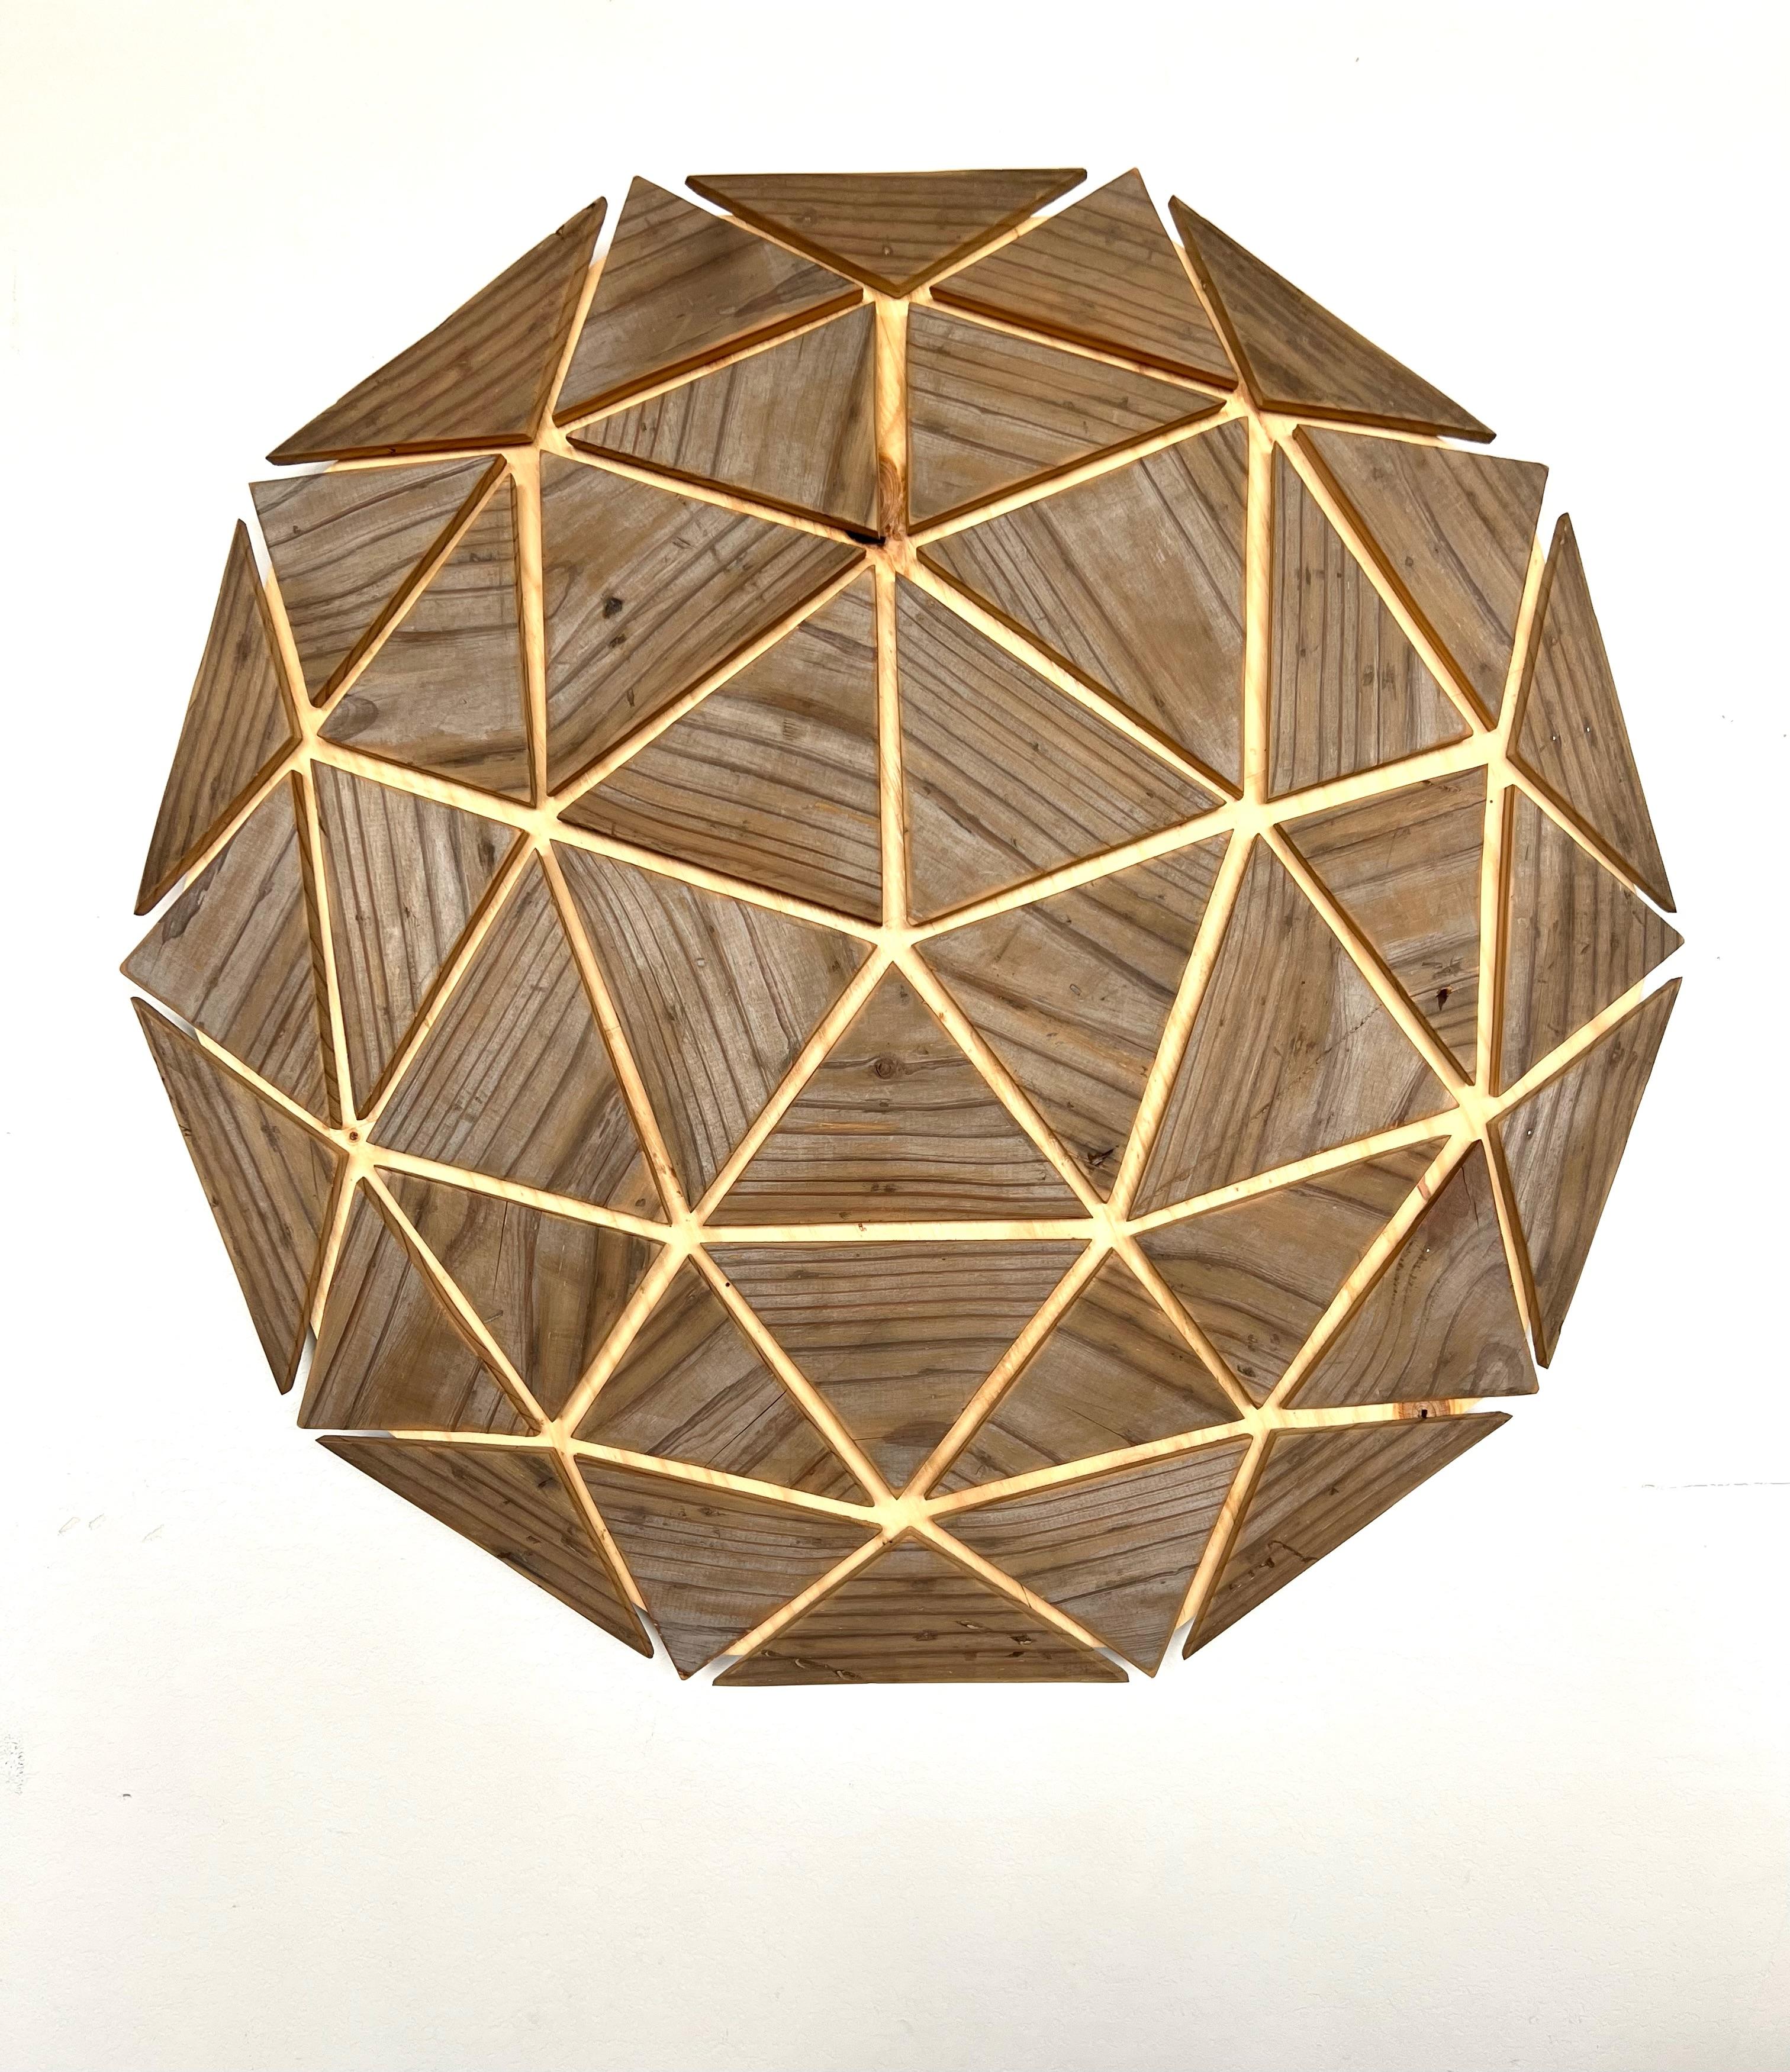 Benjamin Lowder’s artwork reconstitutes aged wood and vintage signs, embracing sacred geometry to build new crystalline patterns and structures. Inspired by architecture and semiotics, Lowder showcases the history of his aged materials to construct